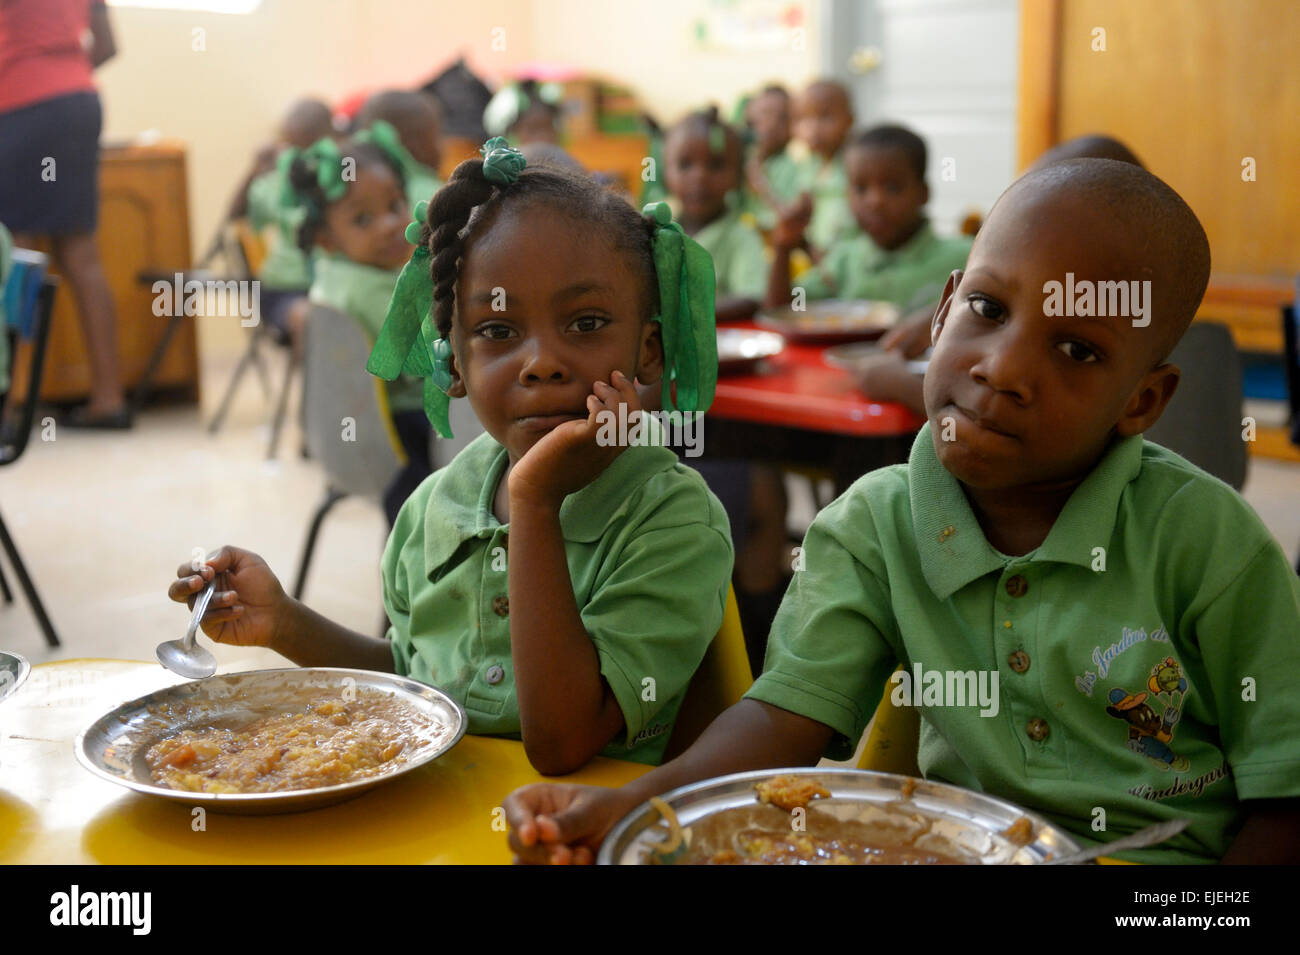 https://c8.alamy.com/comp/EJEH2E/children-eating-lunch-in-the-kindergarten-basile-moreau-primary-school-EJEH2E.jpg